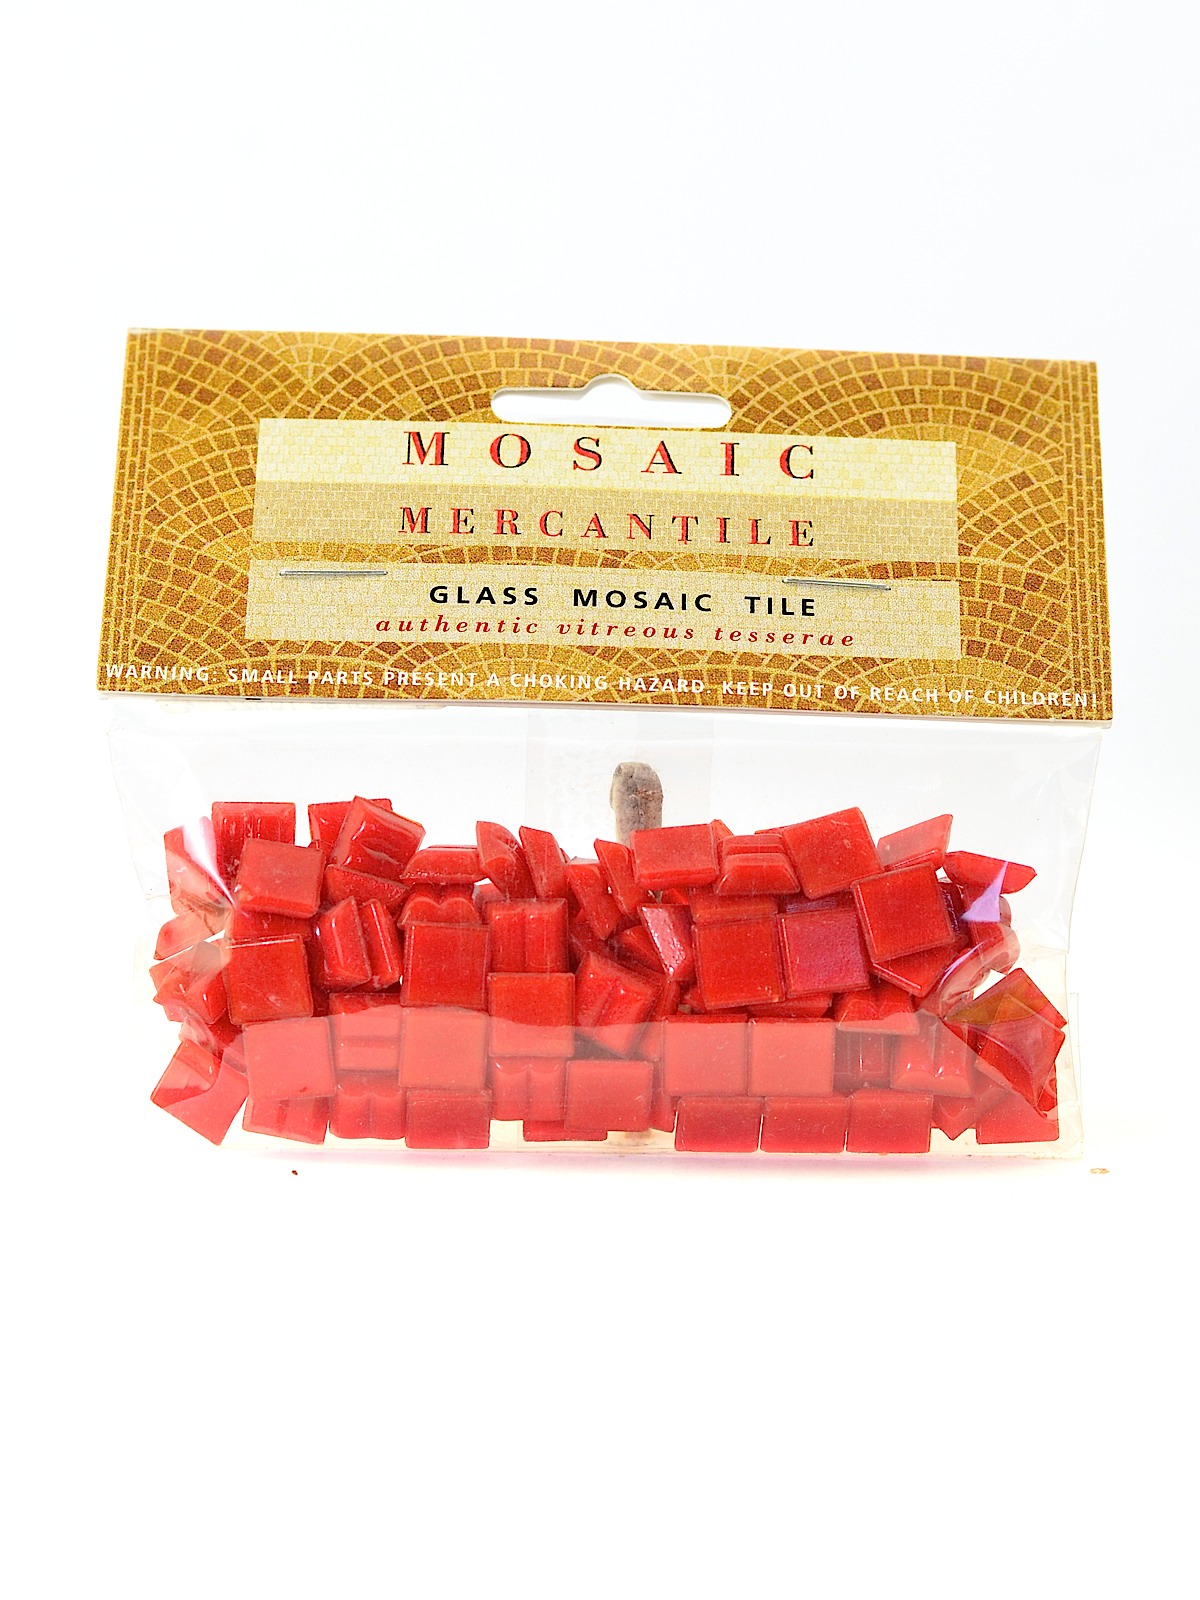 Solid Color Vitreous Glass Mosaic Tile Tomato Red 3 8 In. 1 6 Lb. Bag